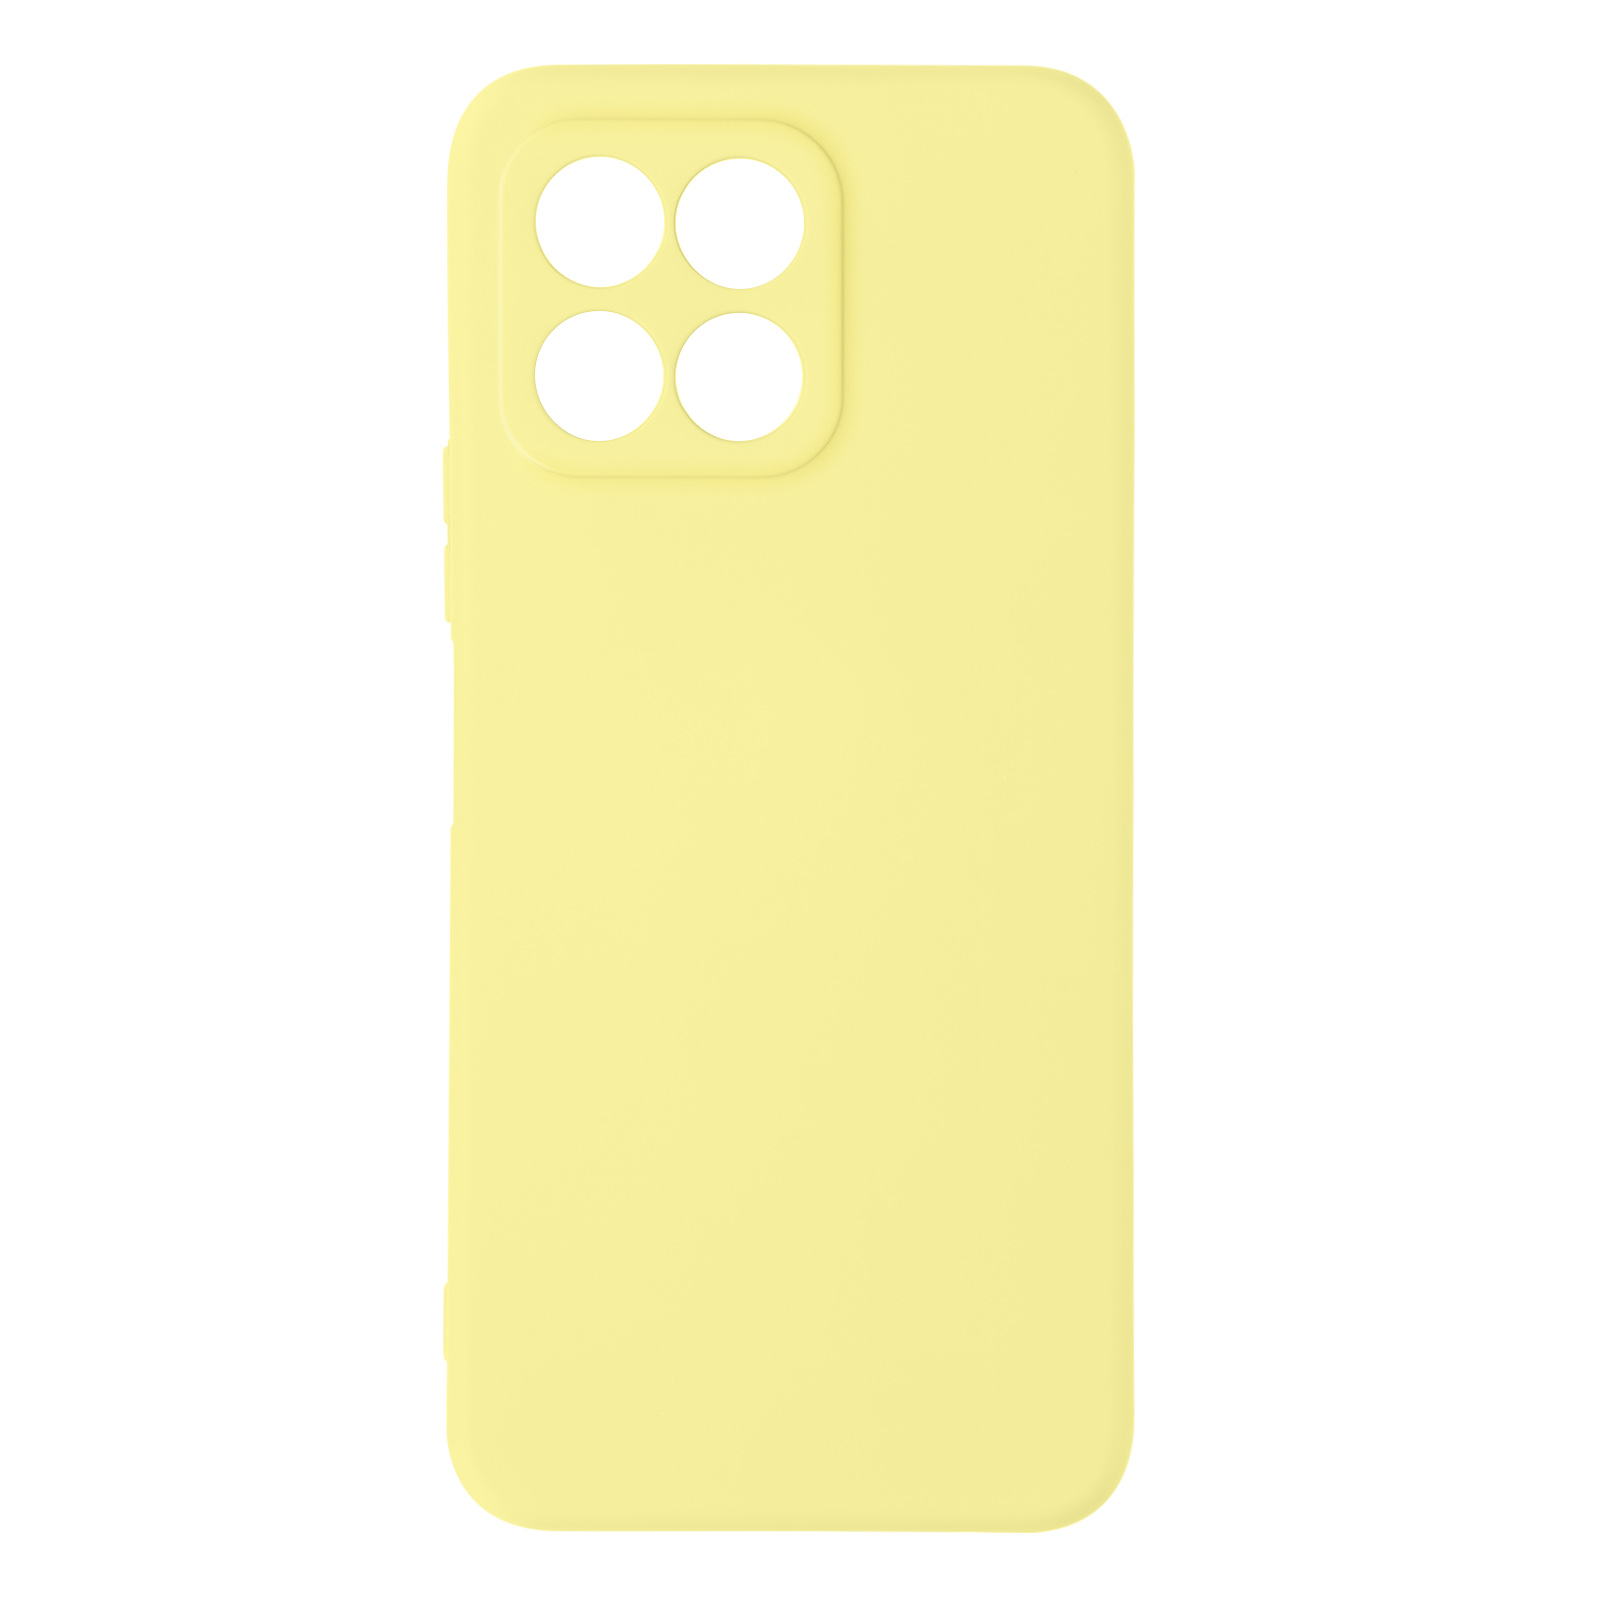 Series, Soft Lite, AVIZAR Gelb Touch Backcover, 70 Honor,